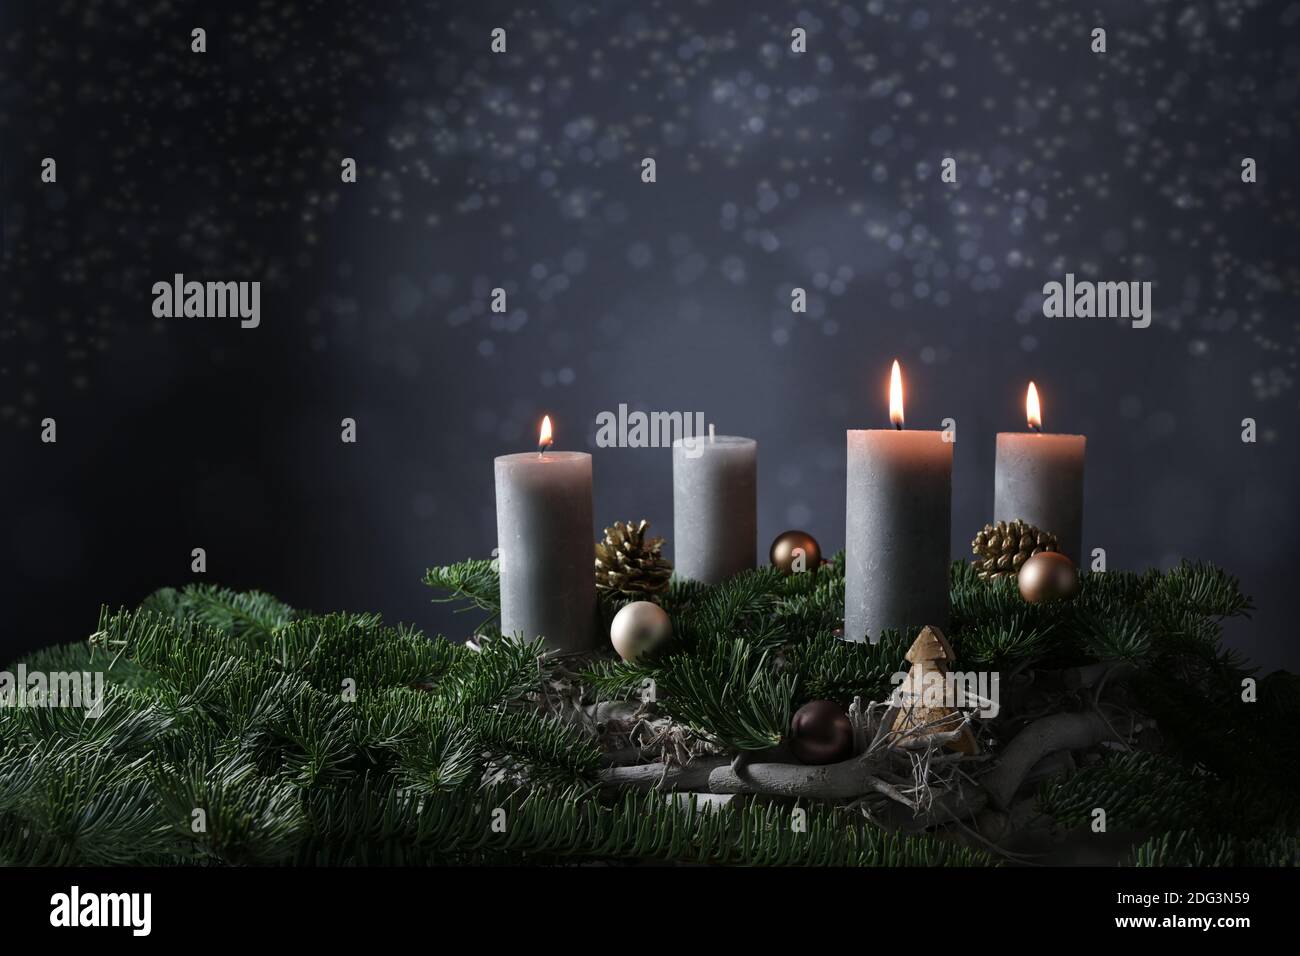 Third Advent High Resolution Stock Photography and Images - Alamy